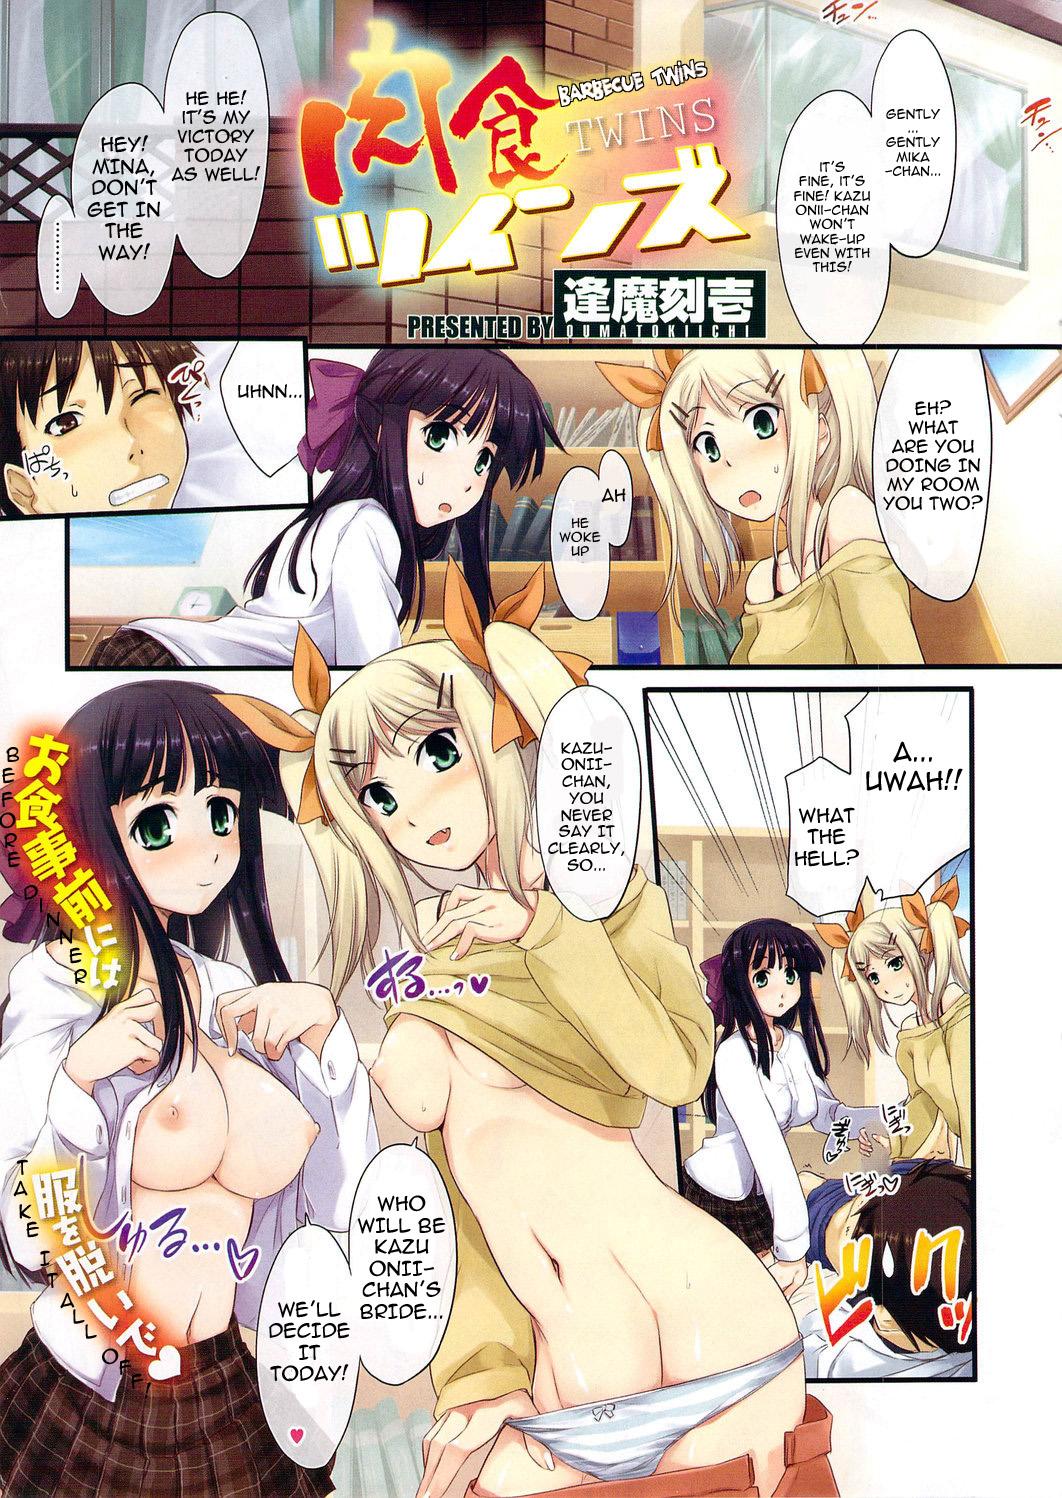 Cheat [Anthology] Short Full-Color H-Manga Chapters [Eng] {doujin-moe.us} Italiano - Page 7